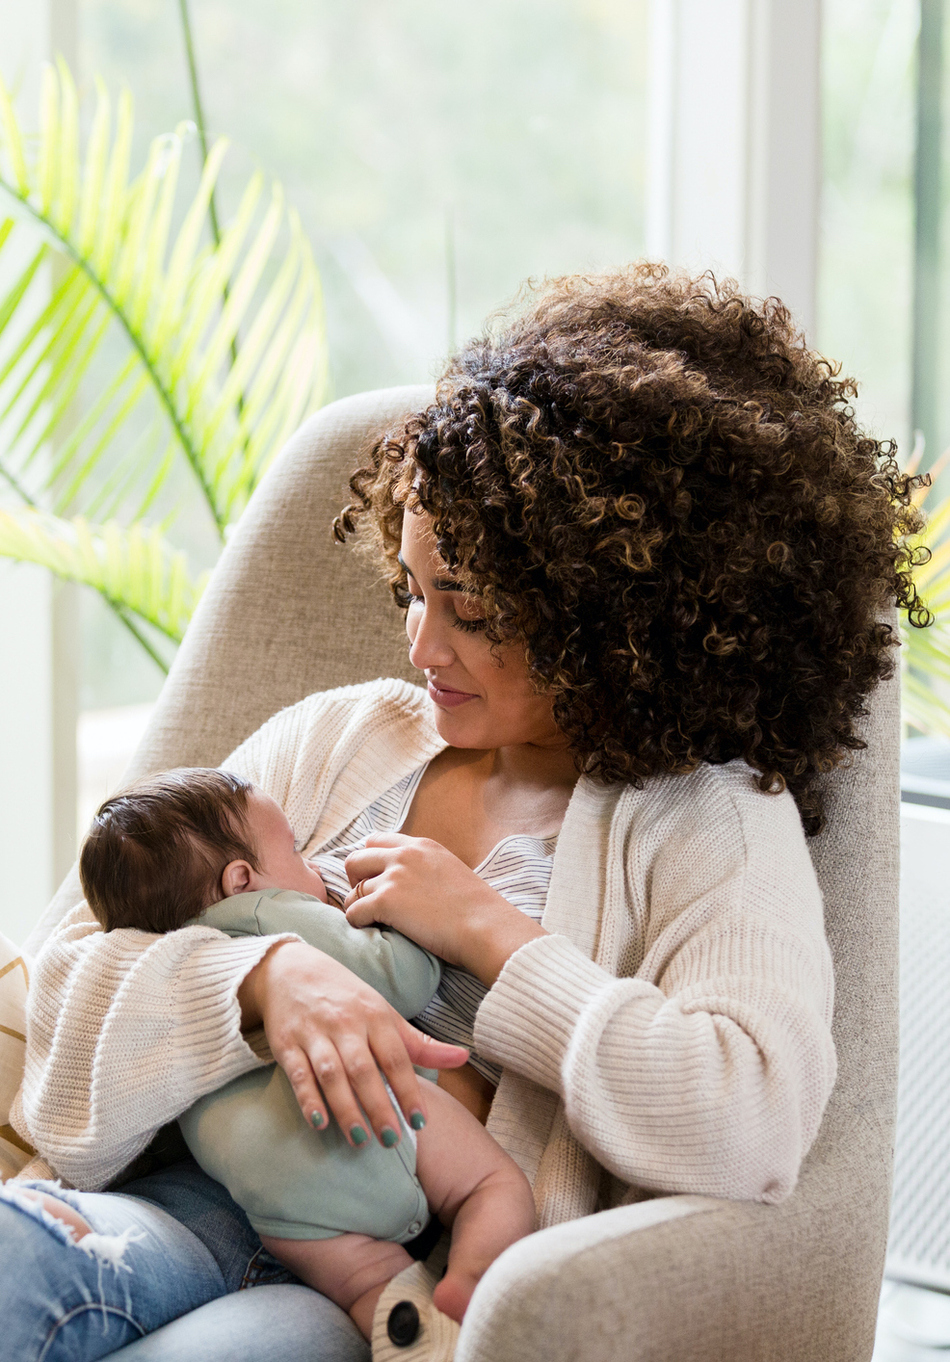 Can Anxiety Transfer to My Baby Through Breastfeeding?